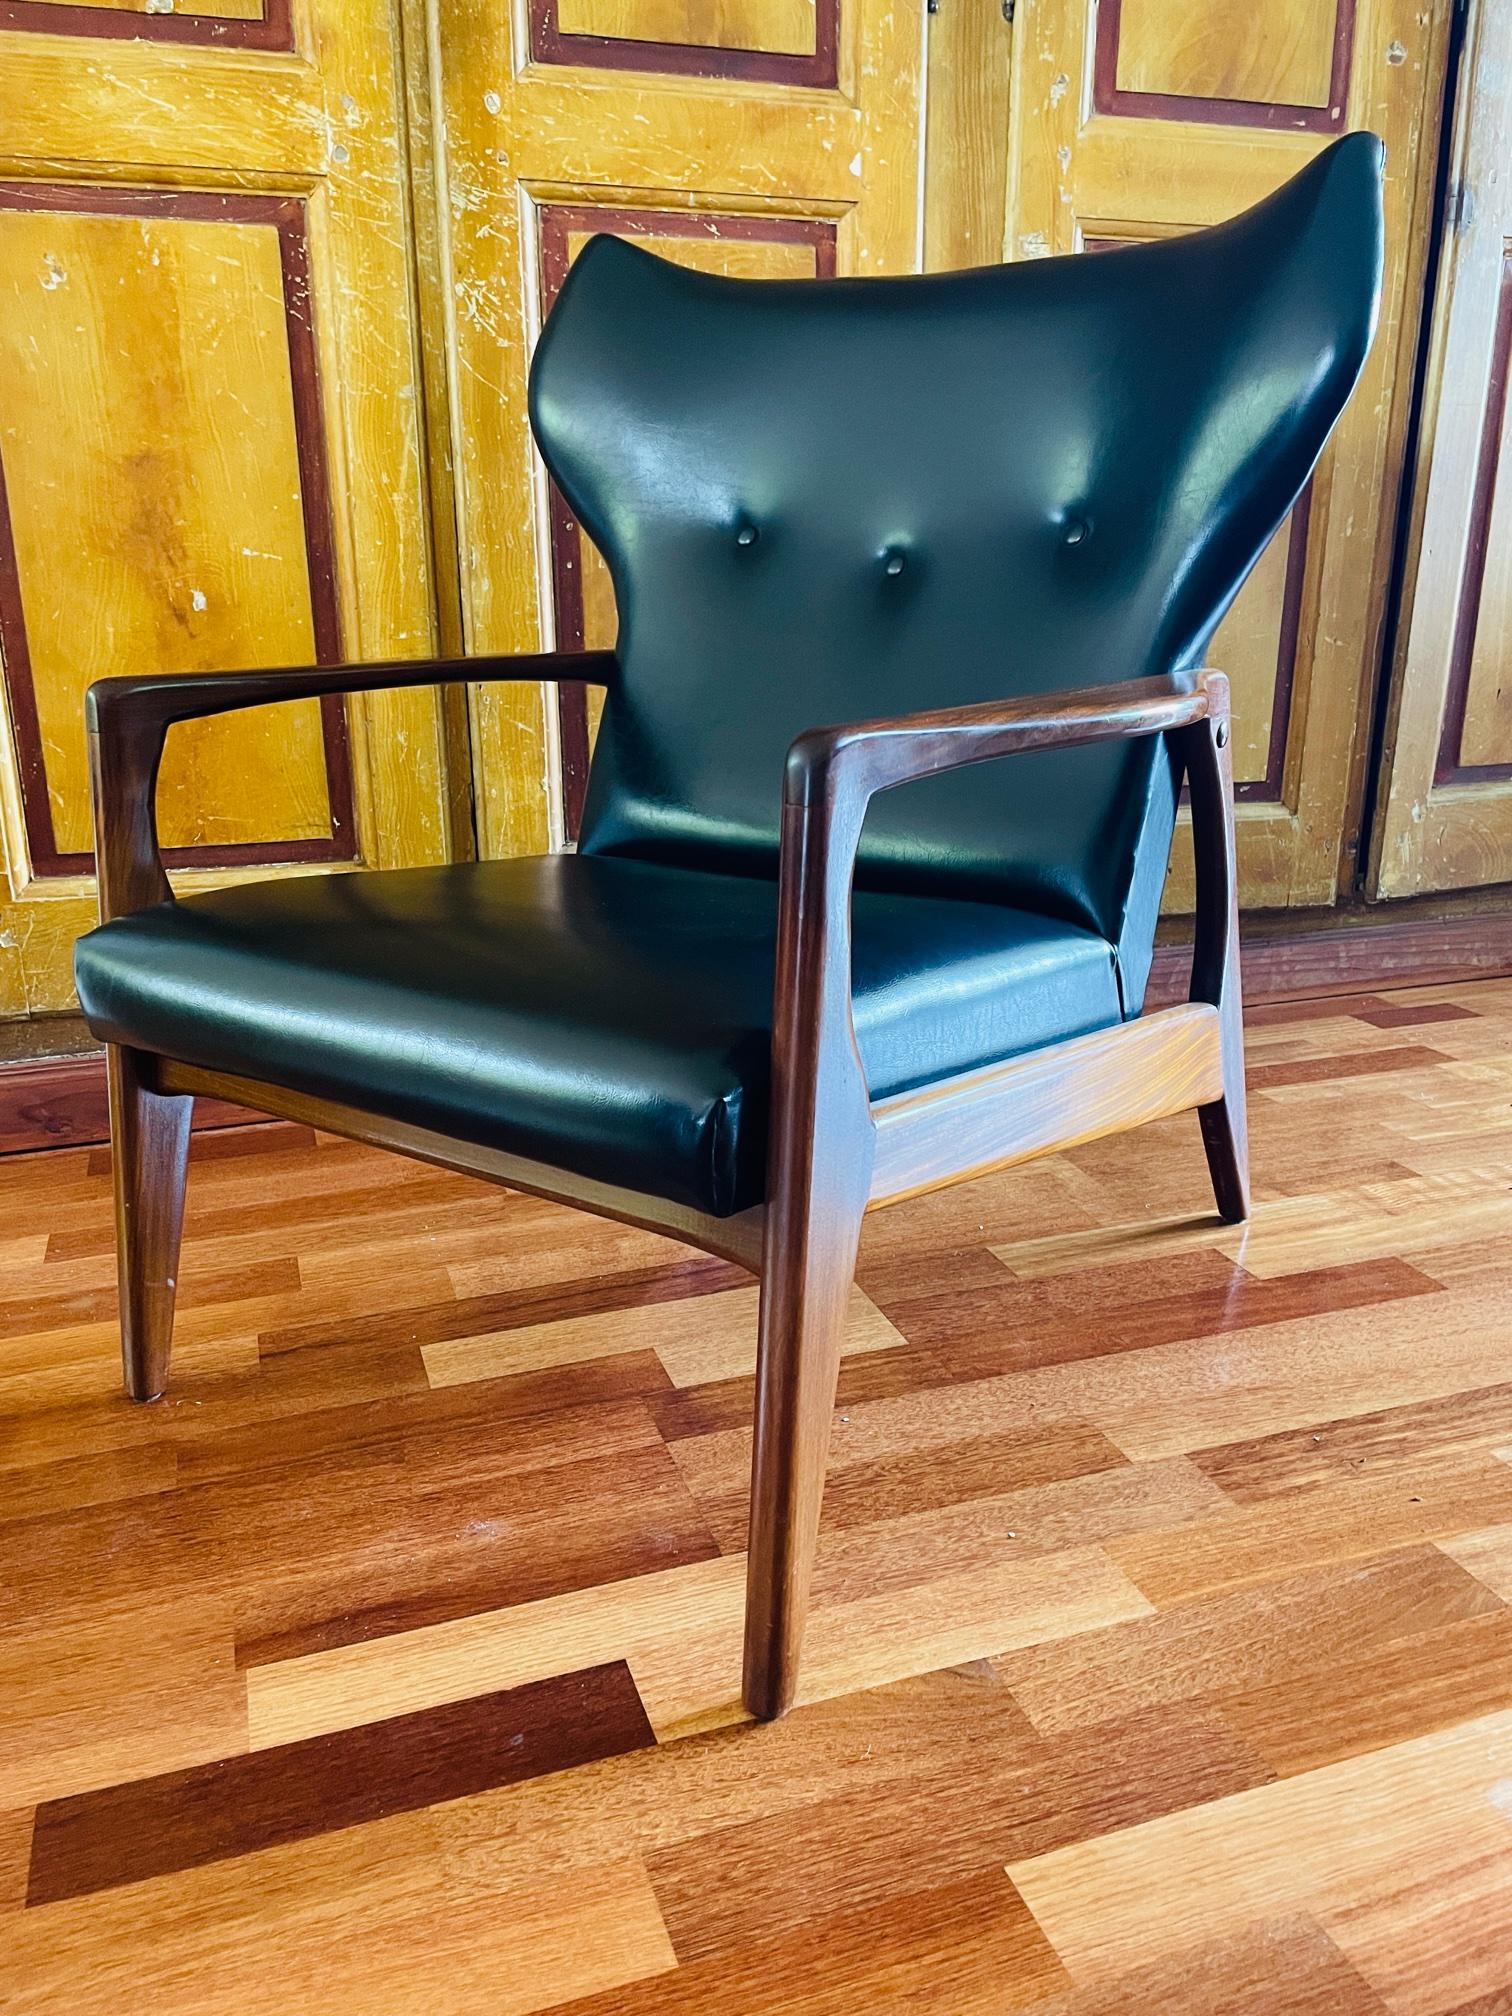 What a chair!! This is the kind of chair you will never see again. Made in the 60's but in absolute top condition! It stood in a small room of an elder couple for decades. They really never sat in it. It was just bought and never used. As you can